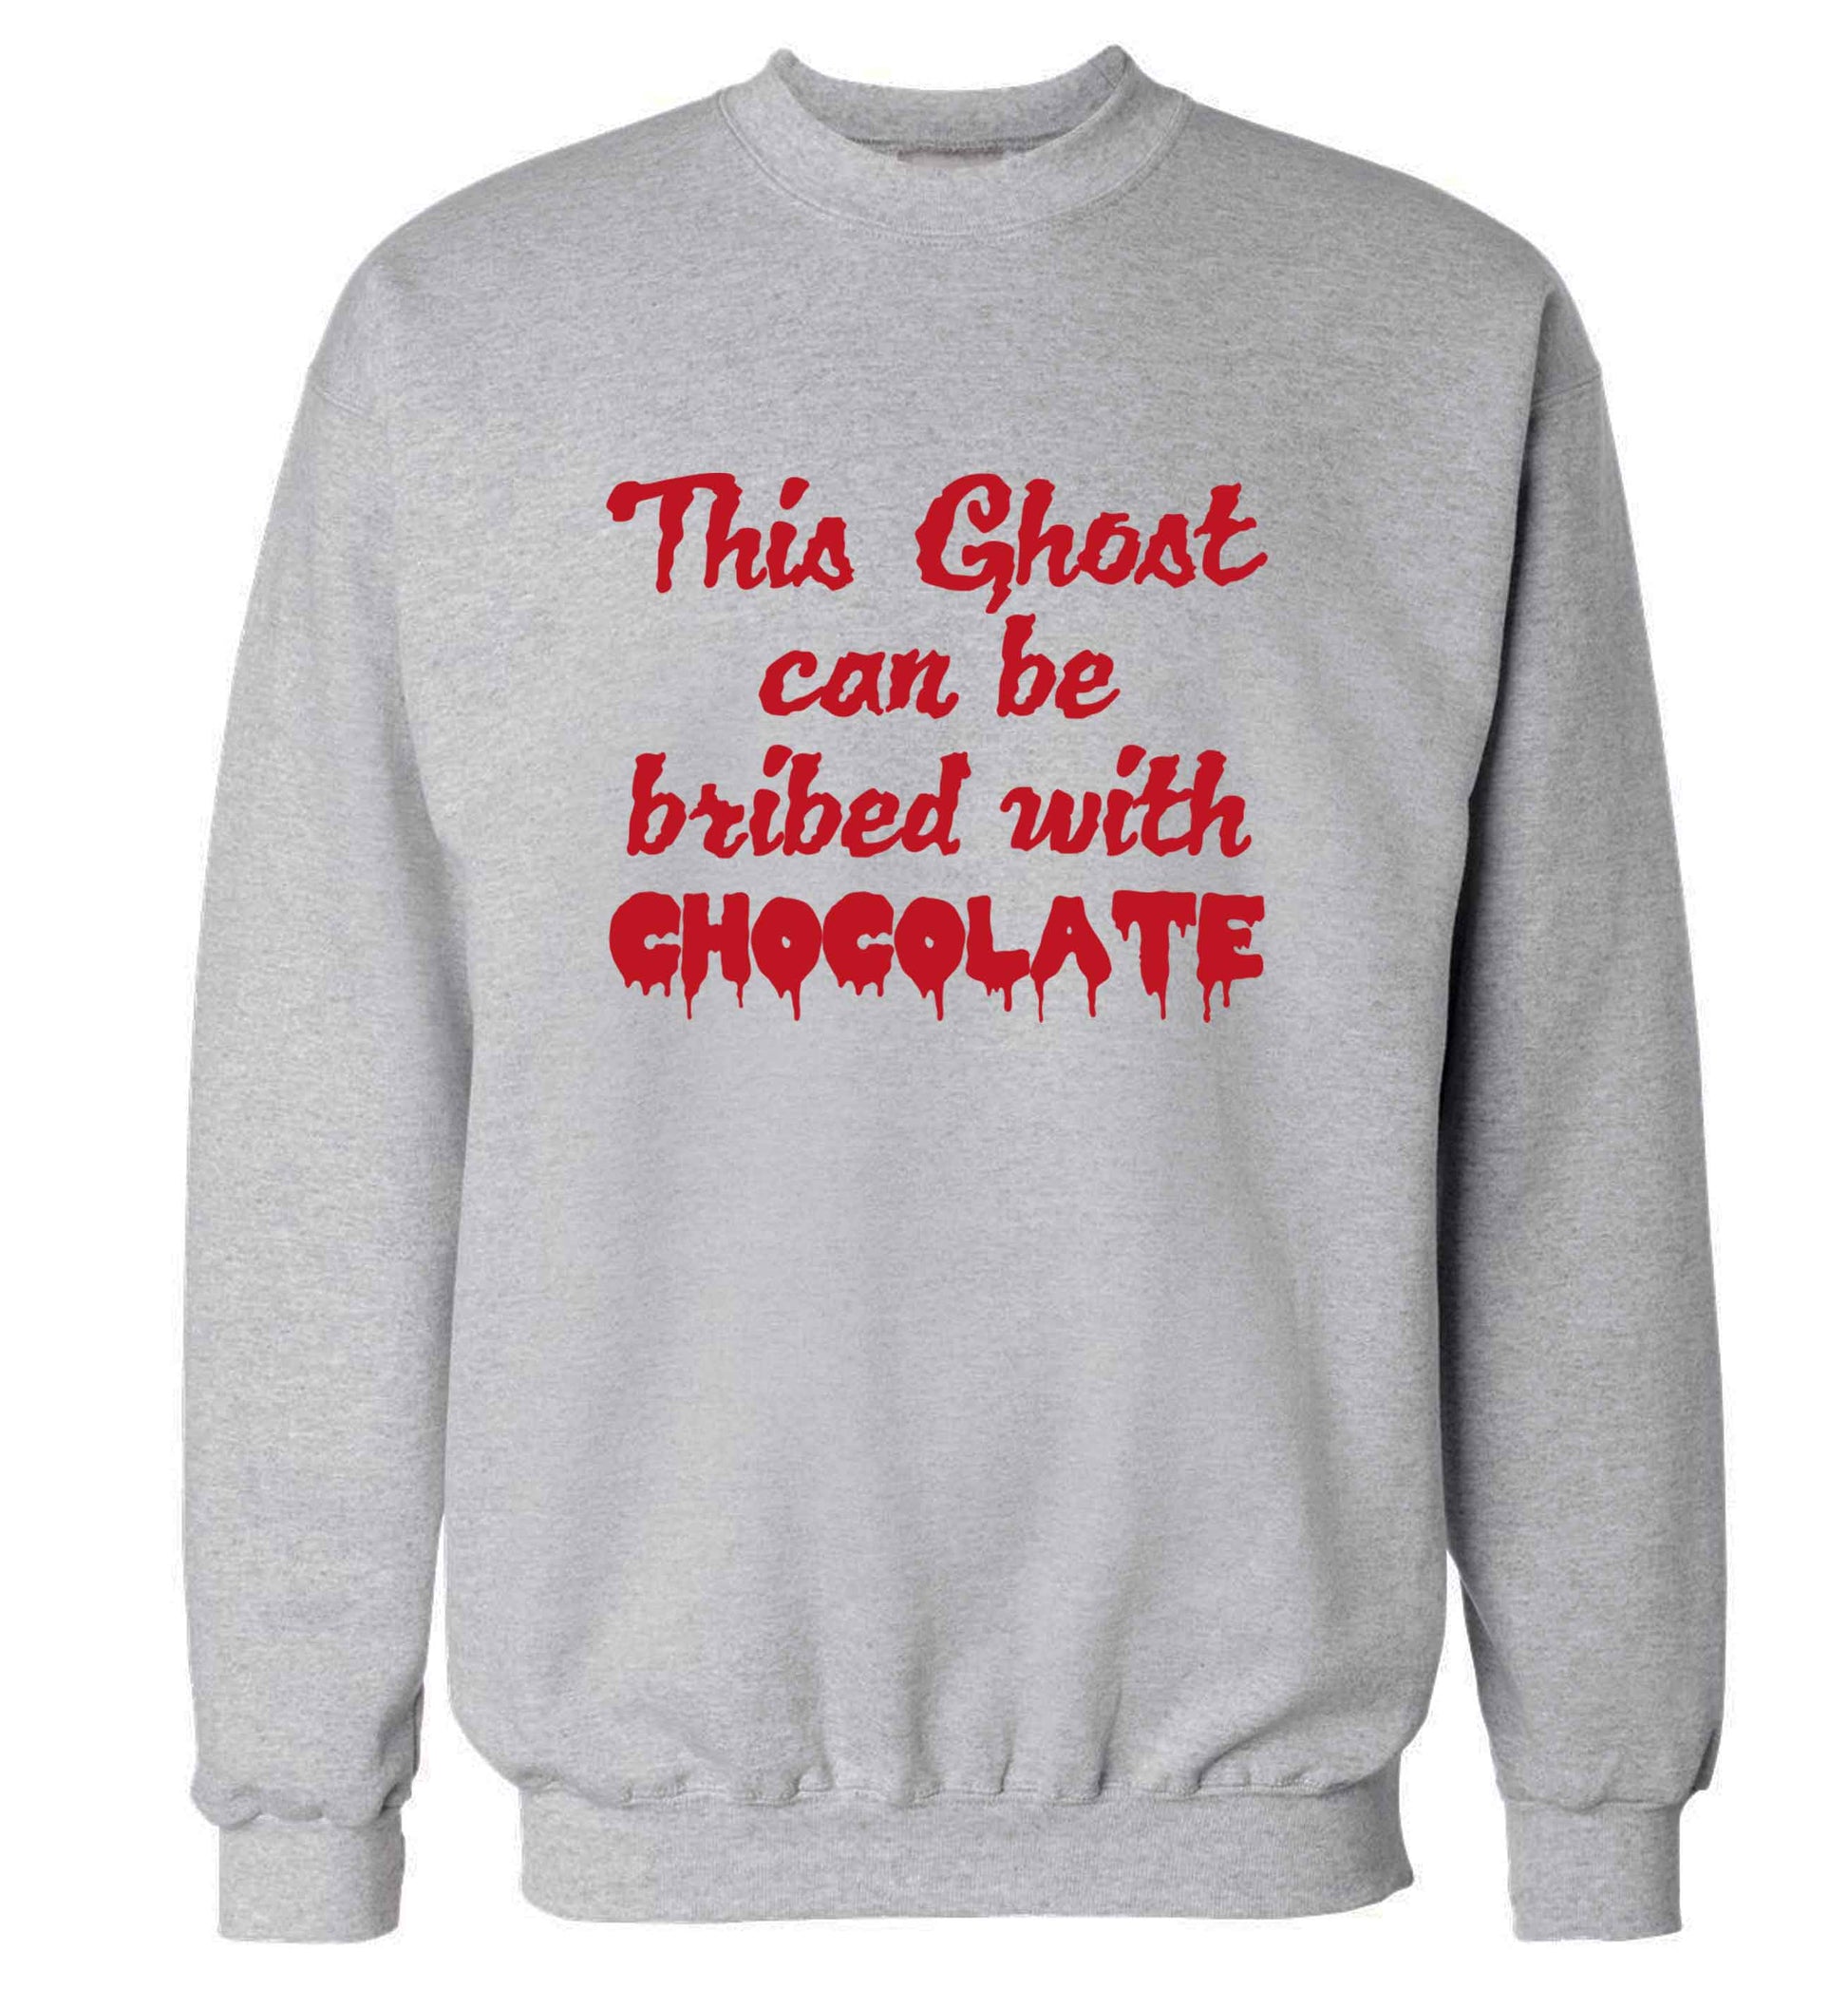 This ghost can be bribed with chocolate adult's unisex grey sweater 2XL